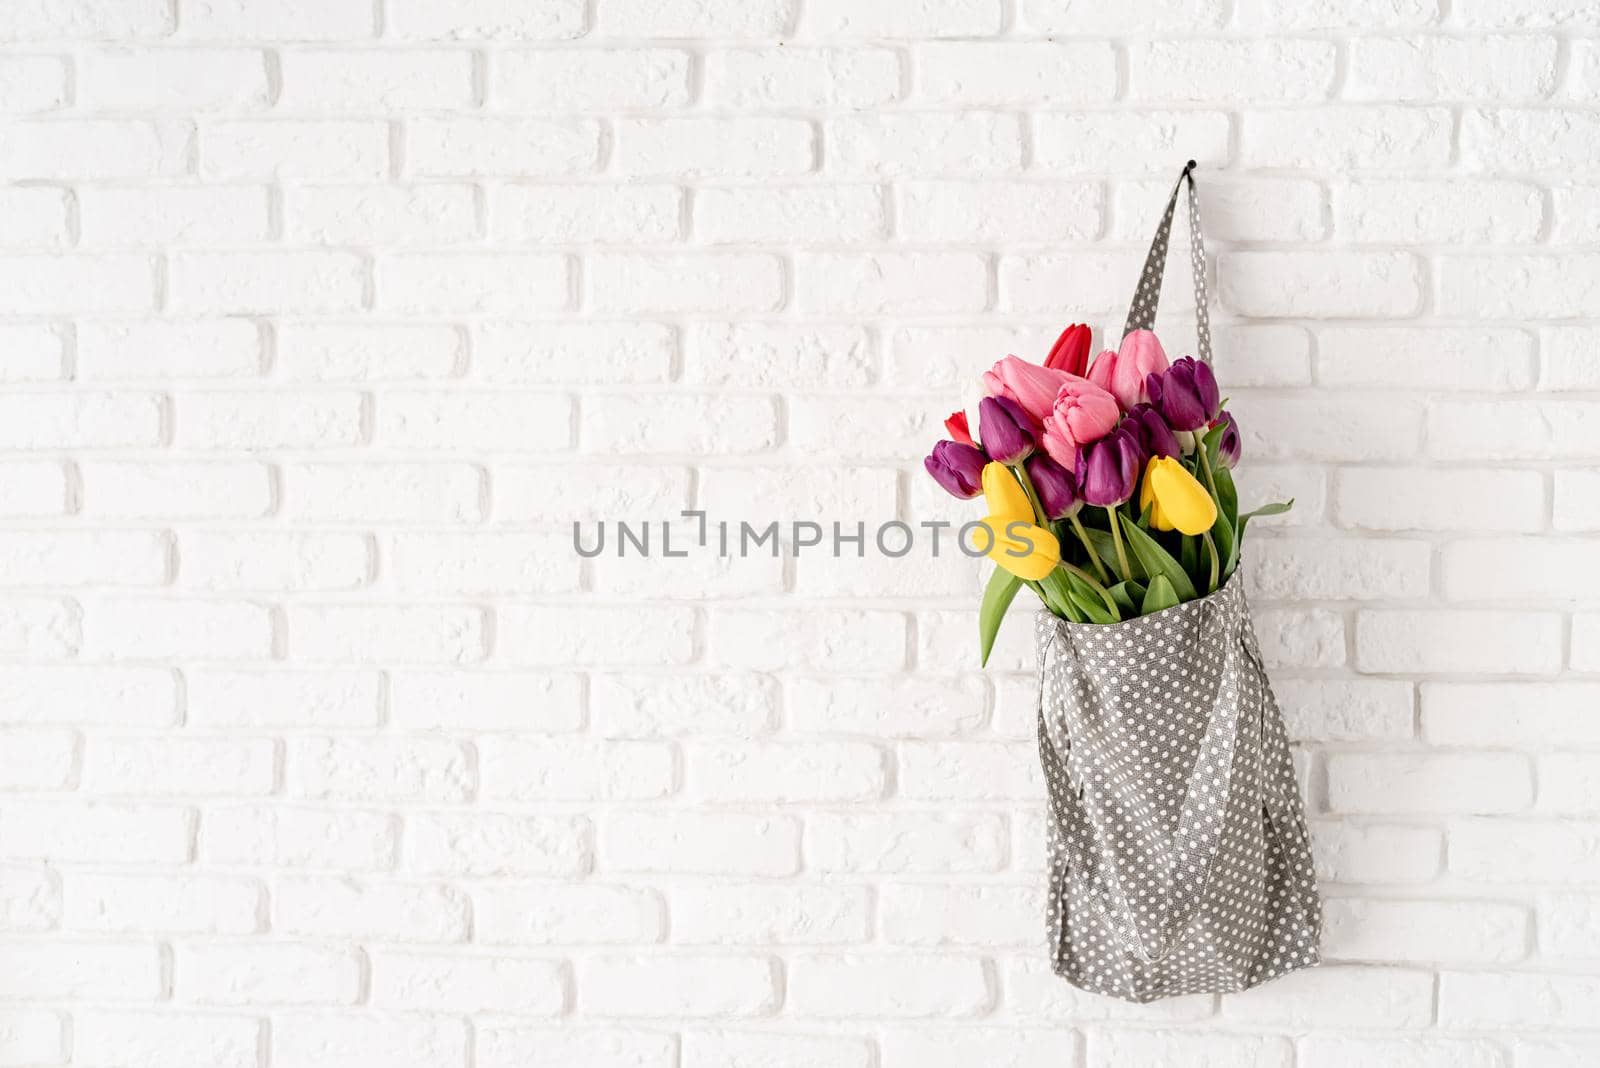 Eco friendly, zero waste concept. Gray fabric bag ful of colorful tulips on white brick background